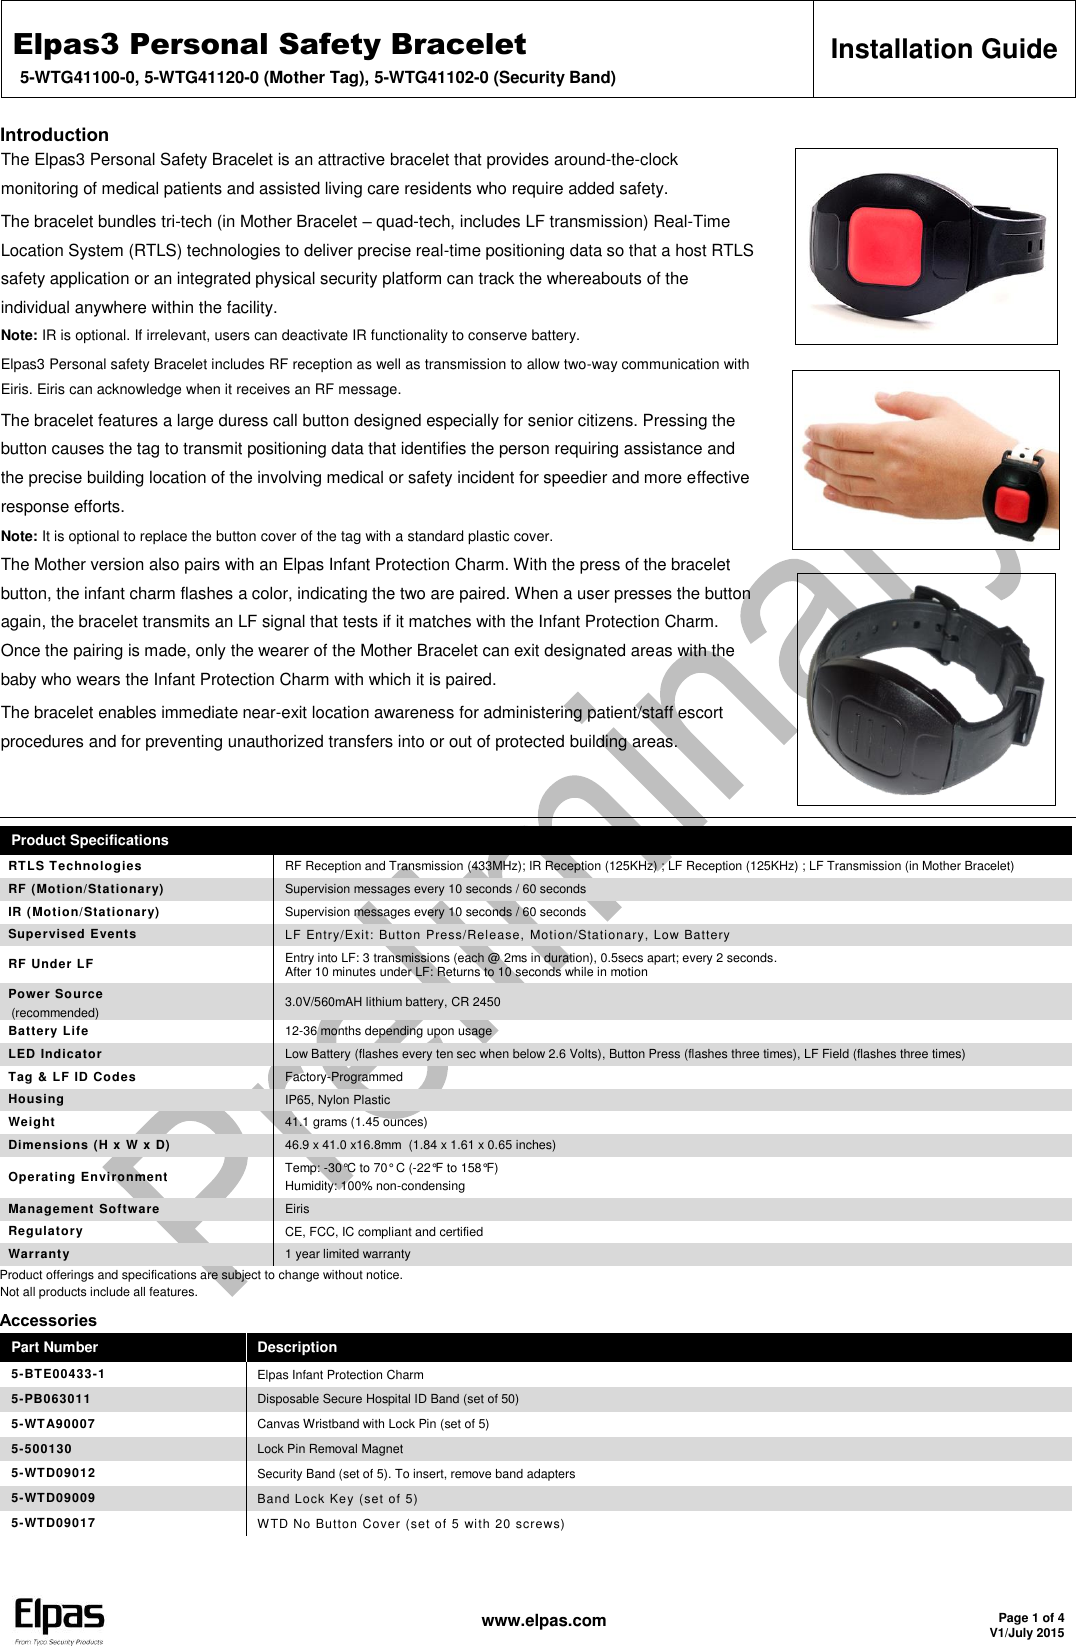 Elpas3 Personal Safety Bracelet 5-WTG41100-0, 5-WTG41120-0 (Mother Tag), 5-WTG41102-0 (Security Band) Installation Guide   www.elpas.com Page 1 of 4 V1/July 2015  Introduction The Elpas3 Personal Safety Bracelet is an attractive bracelet that provides around-the-clock monitoring of medical patients and assisted living care residents who require added safety. The bracelet bundles tri-tech (in Mother Bracelet – quad-tech, includes LF transmission) Real-Time Location System (RTLS) technologies to deliver precise real-time positioning data so that a host RTLS safety application or an integrated physical security platform can track the whereabouts of the individual anywhere within the facility. Note: IR is optional. If irrelevant, users can deactivate IR functionality to conserve battery. Elpas3 Personal safety Bracelet includes RF reception as well as transmission to allow two-way communication with Eiris. Eiris can acknowledge when it receives an RF message. The bracelet features a large duress call button designed especially for senior citizens. Pressing the button causes the tag to transmit positioning data that identifies the person requiring assistance and the precise building location of the involving medical or safety incident for speedier and more effective response efforts. Note: It is optional to replace the button cover of the tag with a standard plastic cover. The Mother version also pairs with an Elpas Infant Protection Charm. With the press of the bracelet button, the infant charm flashes a color, indicating the two are paired. When a user presses the button again, the bracelet transmits an LF signal that tests if it matches with the Infant Protection Charm. Once the pairing is made, only the wearer of the Mother Bracelet can exit designated areas with the baby who wears the Infant Protection Charm with which it is paired. The bracelet enables immediate near-exit location awareness for administering patient/staff escort procedures and for preventing unauthorized transfers into or out of protected building areas.     Product Specifications RTLS Technologies RF Reception and Transmission (433MHz); IR Reception (125KHz) ; LF Reception (125KHz) ; LF Transmission (in Mother Bracelet) RF (Motion/Stationary)  Supervision messages every 10 seconds / 60 seconds IR (Motion/Stationary) Supervision messages every 10 seconds / 60 seconds Supervised Events LF Entry/Exit: Button Press/Release, Motion/Stationary, Low Battery  RF Under LF Entry into LF: 3 transmissions (each @ 2ms in duration), 0.5secs apart; every 2 seconds. After 10 minutes under LF: Returns to 10 seconds while in motion Power Source (recommended) 3.0V/560mAH lithium battery, CR 2450 Battery Life 12-36 months depending upon usage LED Indicator Low Battery (flashes every ten sec when below 2.6 Volts), Button Press (flashes three times), LF Field (flashes three times) Tag &amp; LF ID Codes Factory-Programmed Housing IP65, Nylon Plastic Weight 41.1 grams (1.45 ounces) Dimensions (H x W x D)  46.9 x 41.0 x16.8mm  (1.84 x 1.61 x 0.65 inches) Operating Environment Temp: -30°C to 70° C (-22°F to 158°F) Humidity: 100% non-condensing Management Software Eiris Regulatory CE, FCC, IC compliant and certified Warranty 1 year limited warranty Product offerings and specifications are subject to change without notice. Not all products include all features. Accessories Part Number Description 5-BTE00433-1 Elpas Infant Protection Charm 5-PB063011 Disposable Secure Hospital ID Band (set of 50) 5-WTA90007 Canvas Wristband with Lock Pin (set of 5) 5-500130 Lock Pin Removal Magnet 5-WTD09012 Security Band (set of 5). To insert, remove band adapters 5-WTD09009 Band Lock Key (set of 5) 5-WTD09017 WTD No Button Cover (set of 5 with 20 screws)   